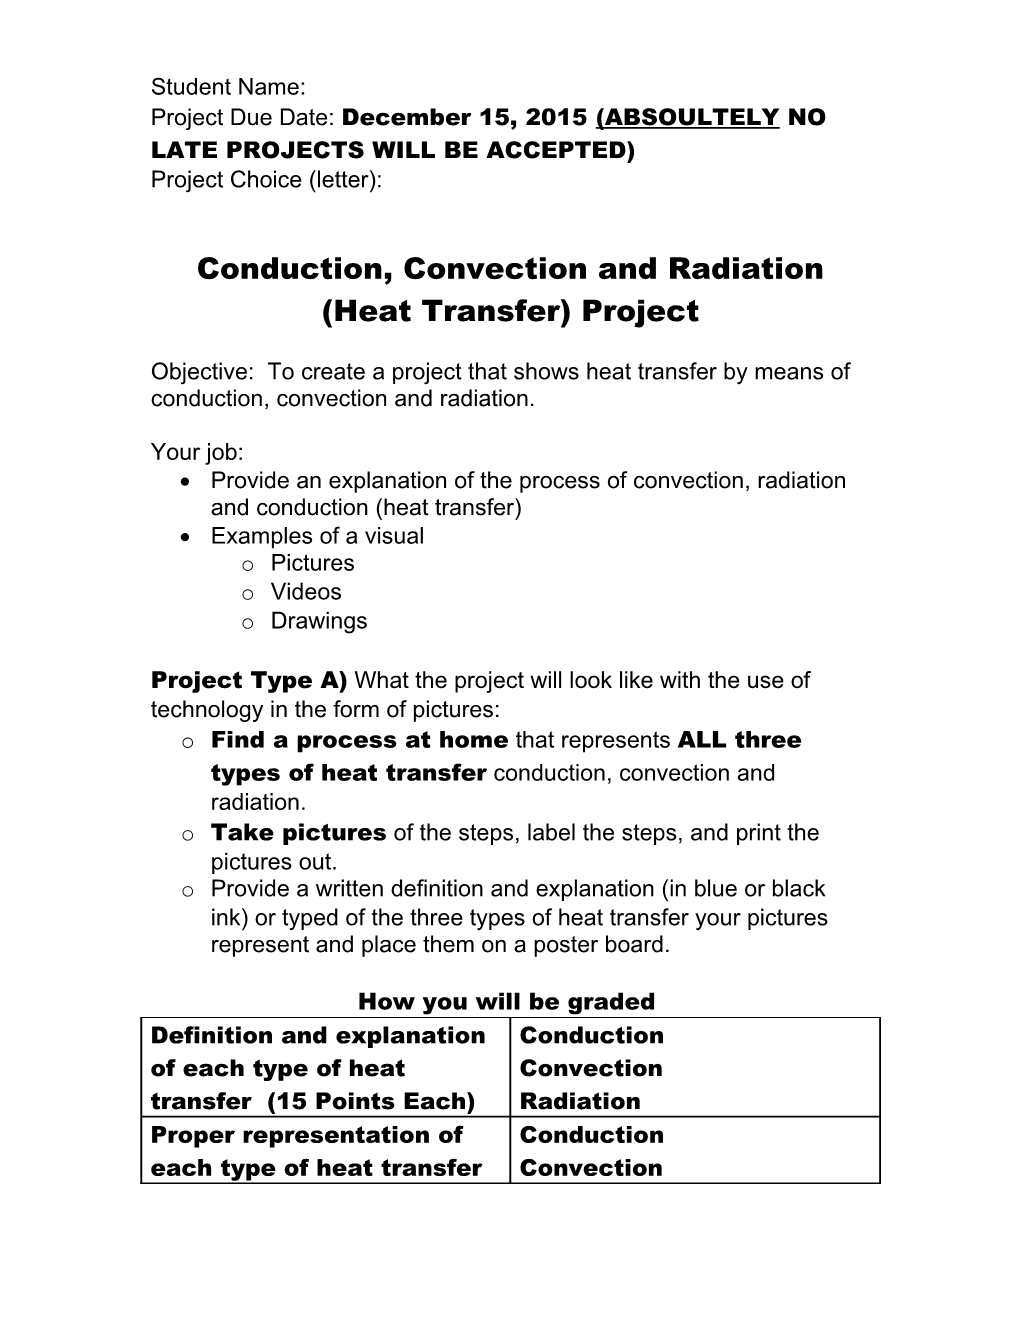 Radiation, Convection, and Conduction Project